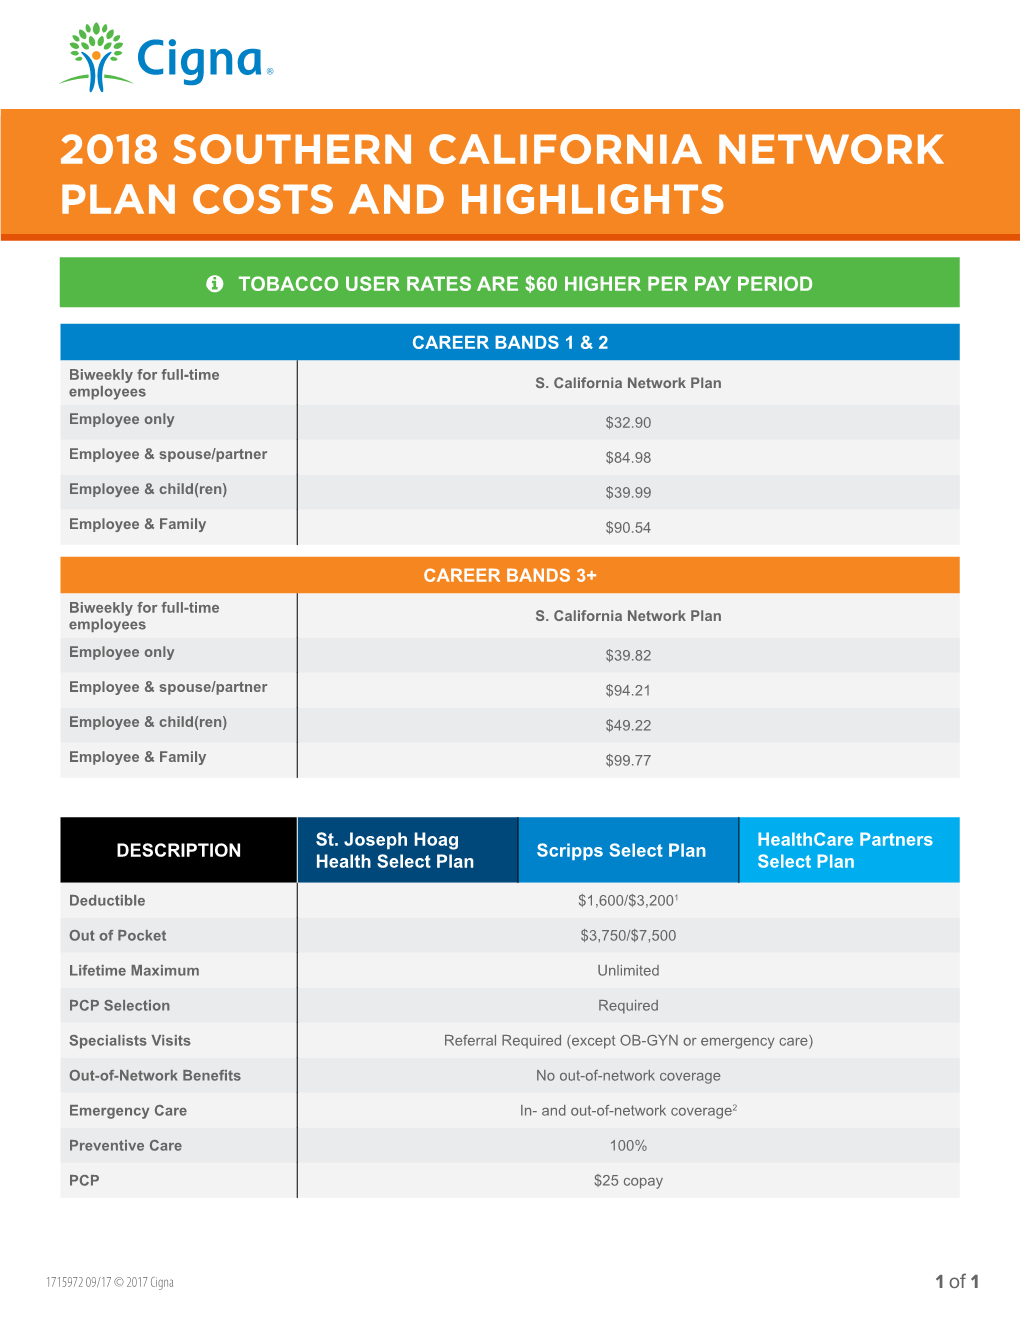 2018 Southern California NETWORK Plan Costs and Highlights